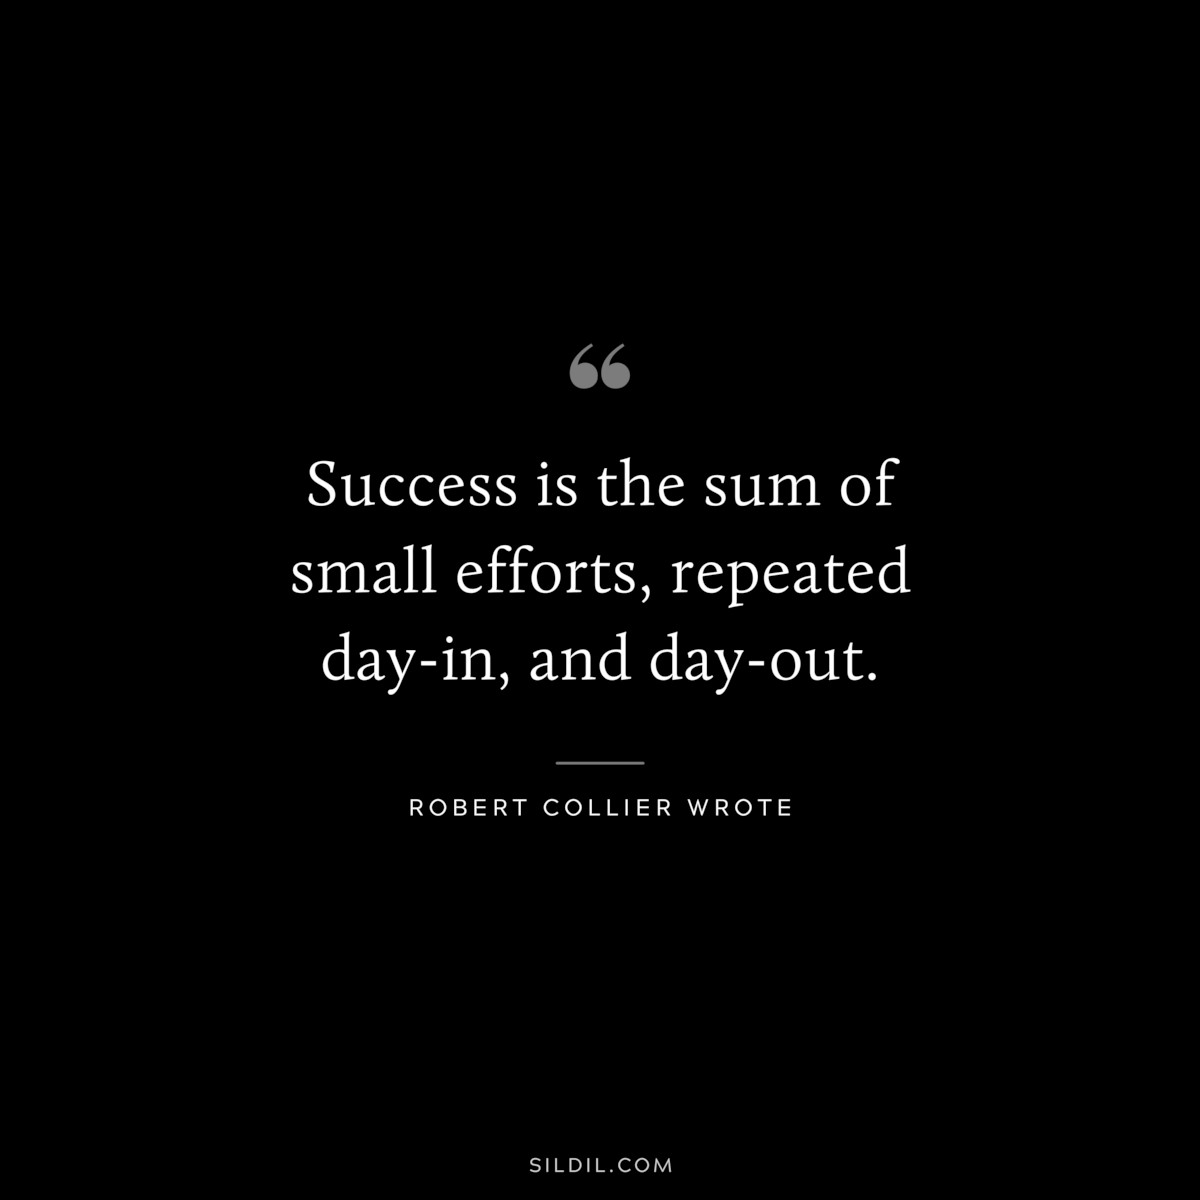 Success is the sum of small efforts, repeated day-in, and day-out. ― Robert Collier wrote